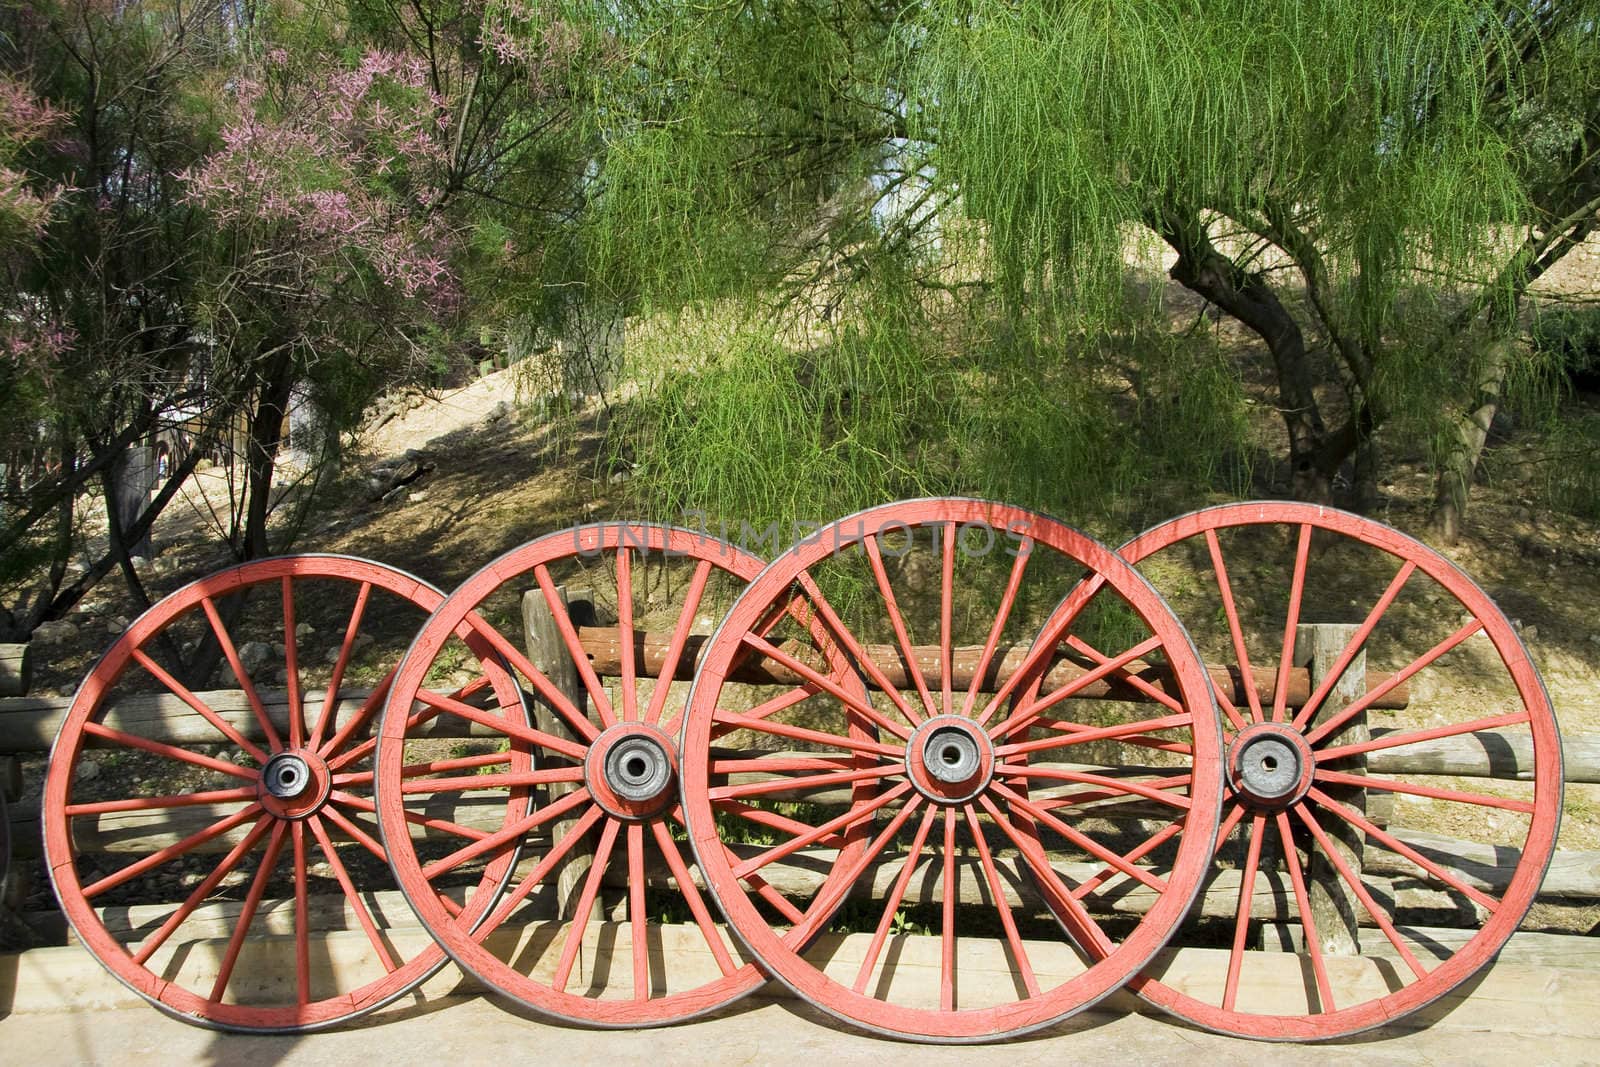 Four old wooden wheel
